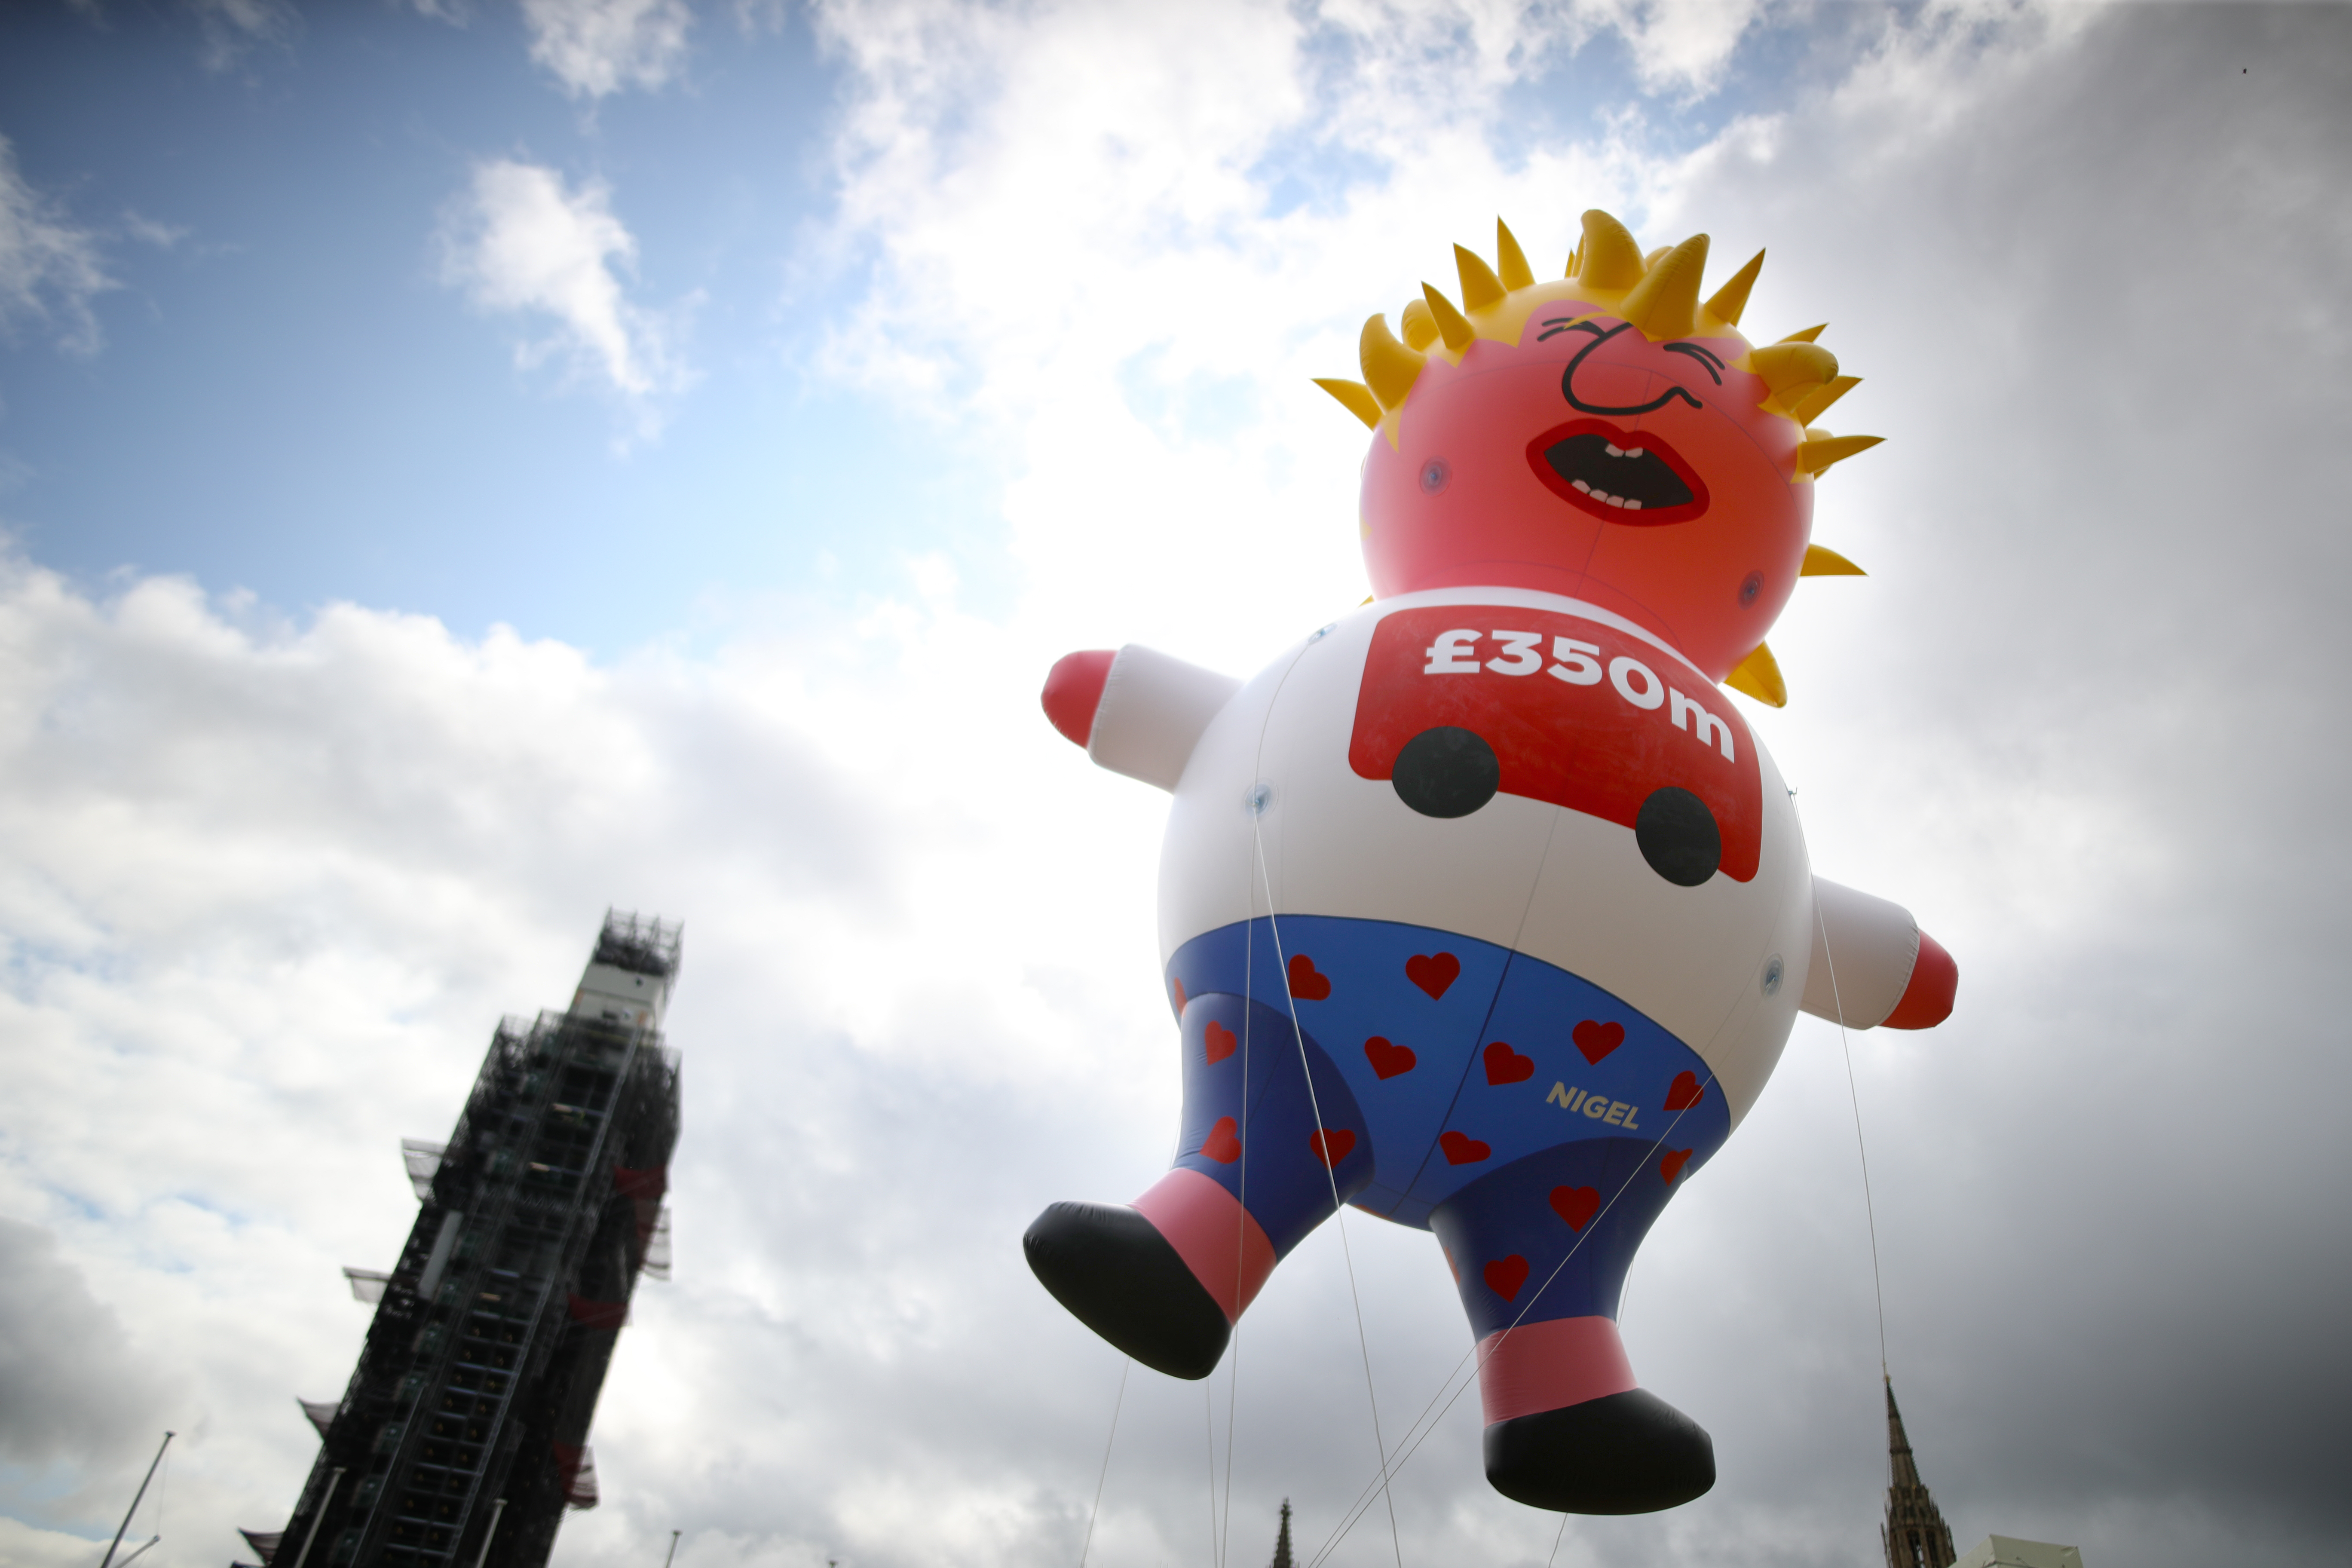 A blimp depicting Boris Johnson is launched in Parliament Square, London, ahead of a pro-European Union a march organised by March for Change. (Aaron Chown/PA)